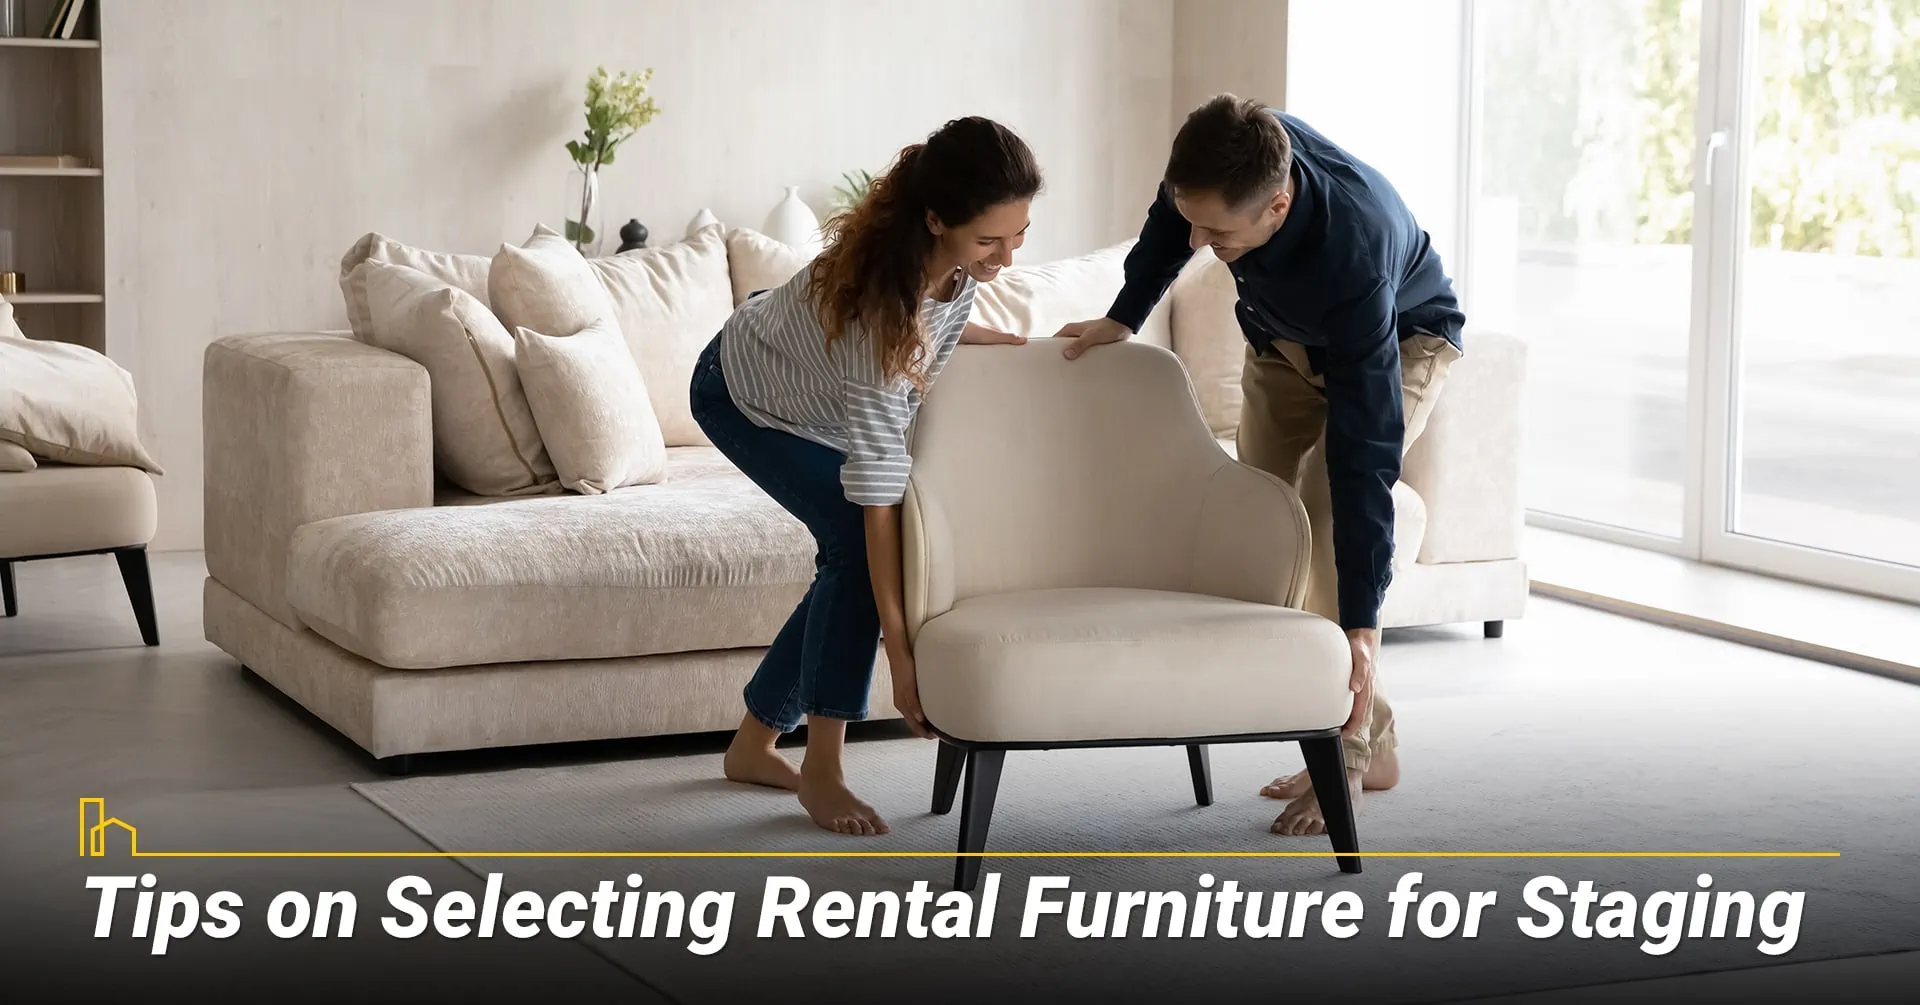 Tips on Selecting Rental Furniture for Staging